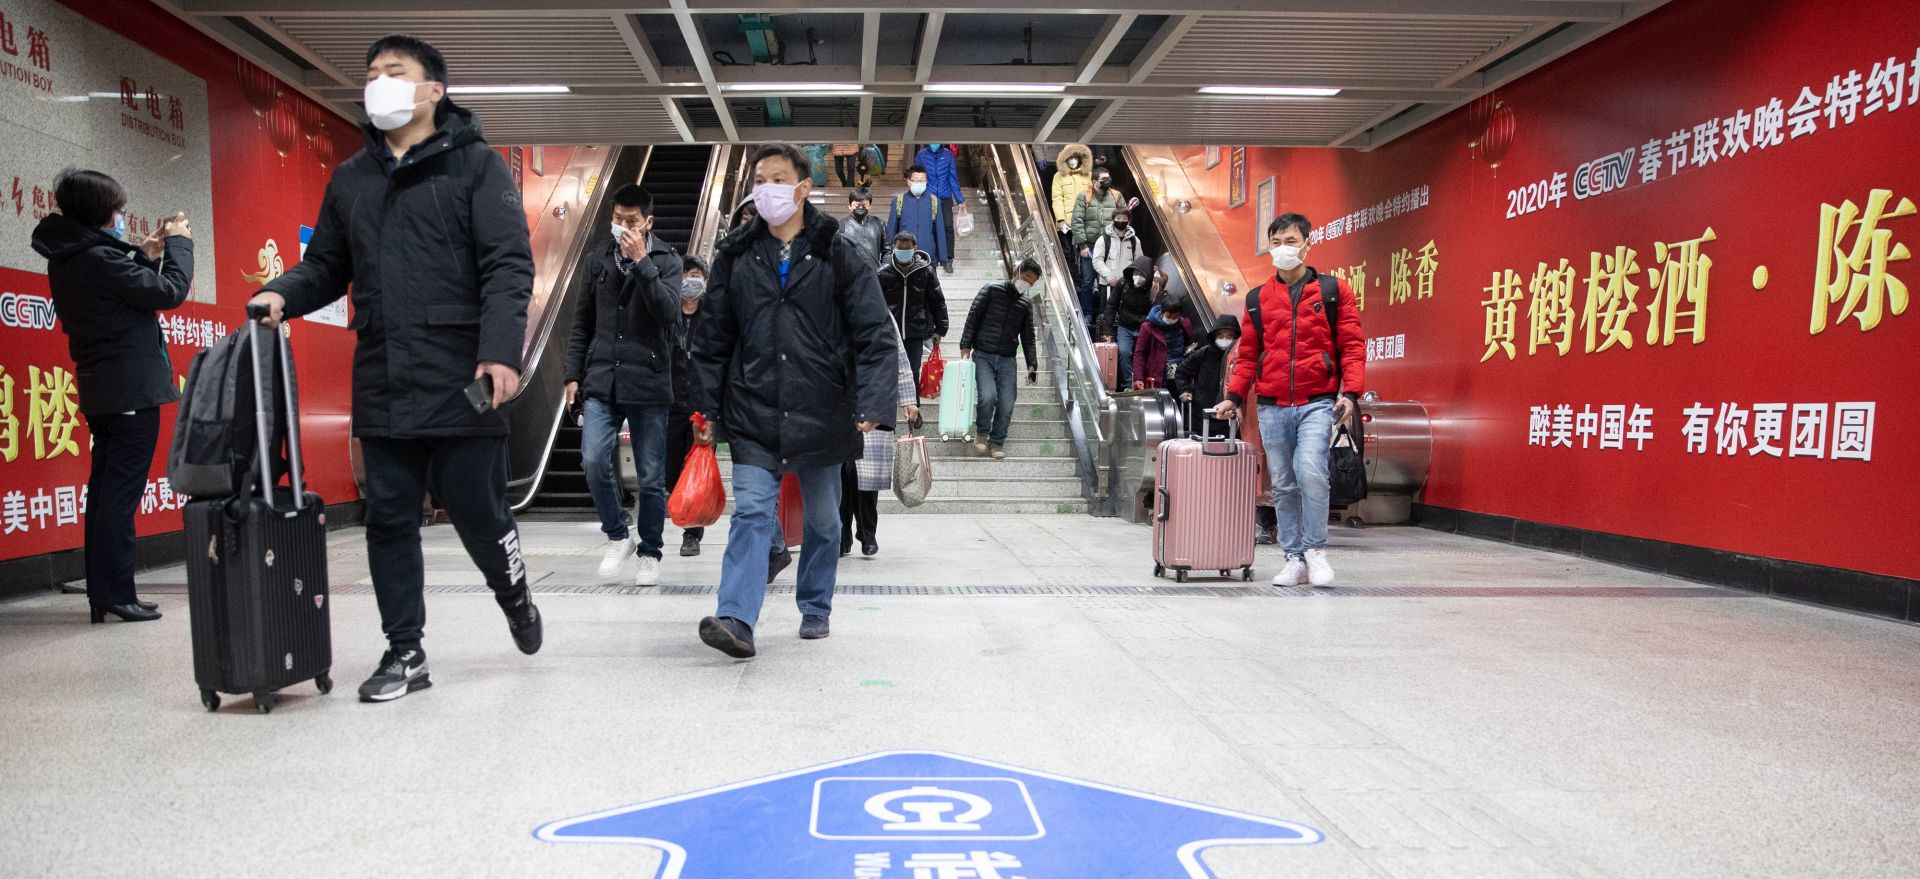 epa08327881 Passengers wearing masks enter a subway station in Wuhan, Hubei Province, China, 28 March 2020. The city of Wuhan, China's epicentre of the coronavirus outbreak, partially resumed rail and subway services on 28 March 2020 after it was locked down for more than two months amid the Covid-19 pandemic.  EPA/YFC CHINA OUT